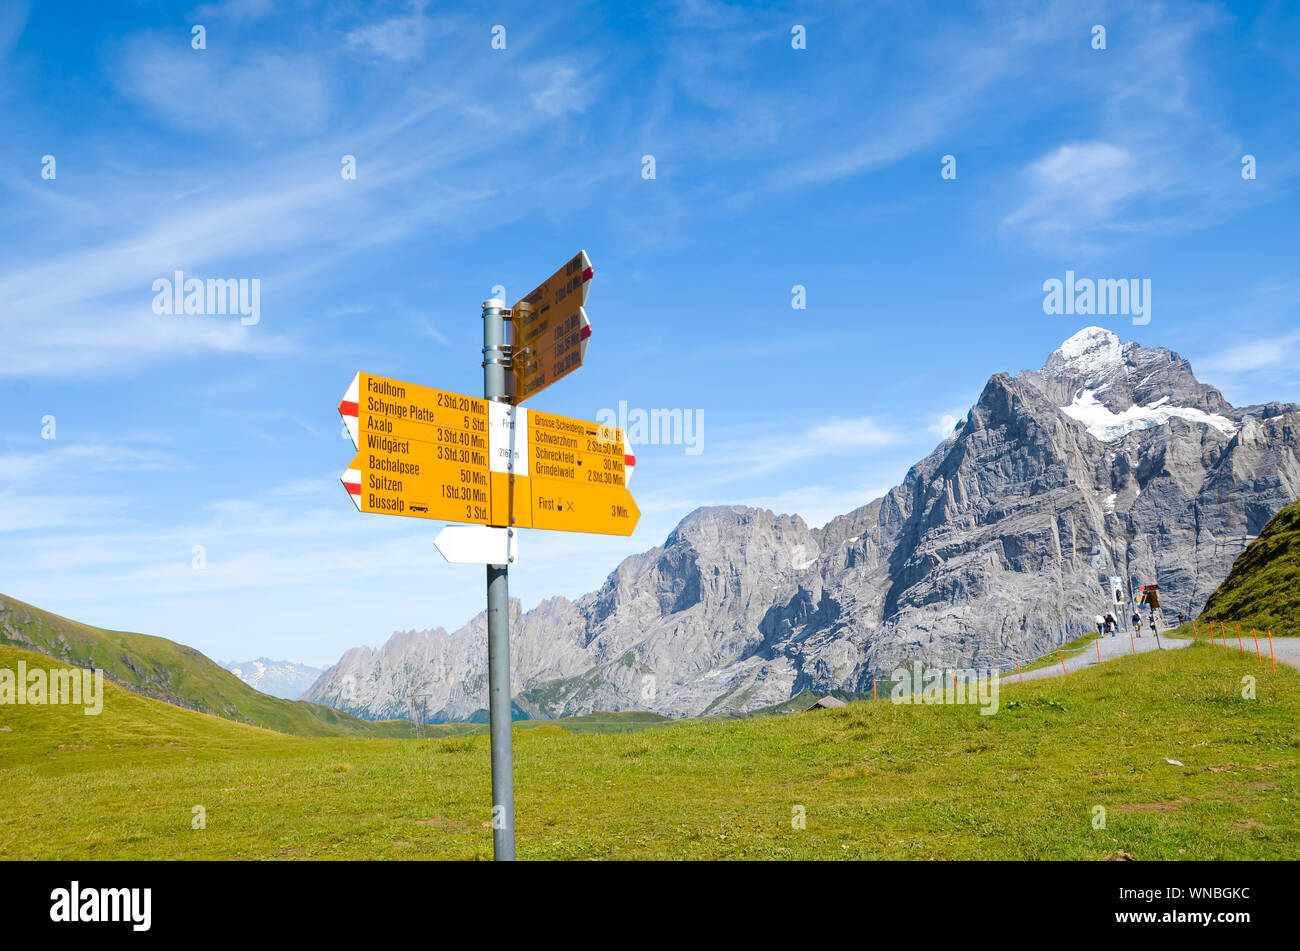 Yellow tourist sign in First, Switzerland giving distances and directions to hikers in the Swiss Alps. Popular hiking paths by Grindelwald leading to Bachalpsee. Summer Alpine landscape in background. Stock Photo